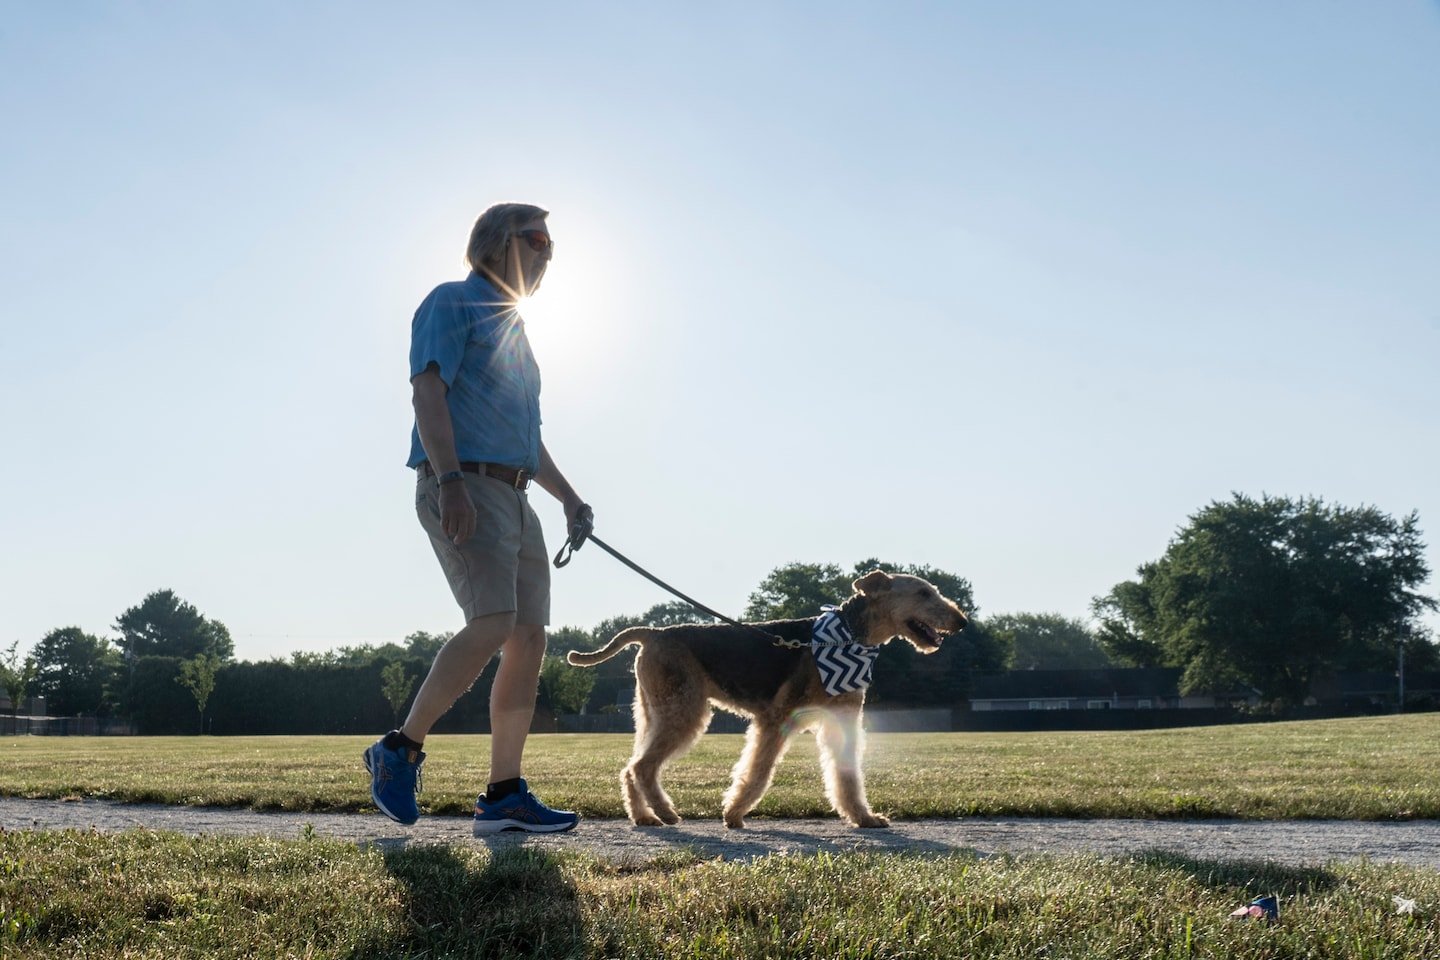 For dogs, the pandemic means more walks but new anxieties